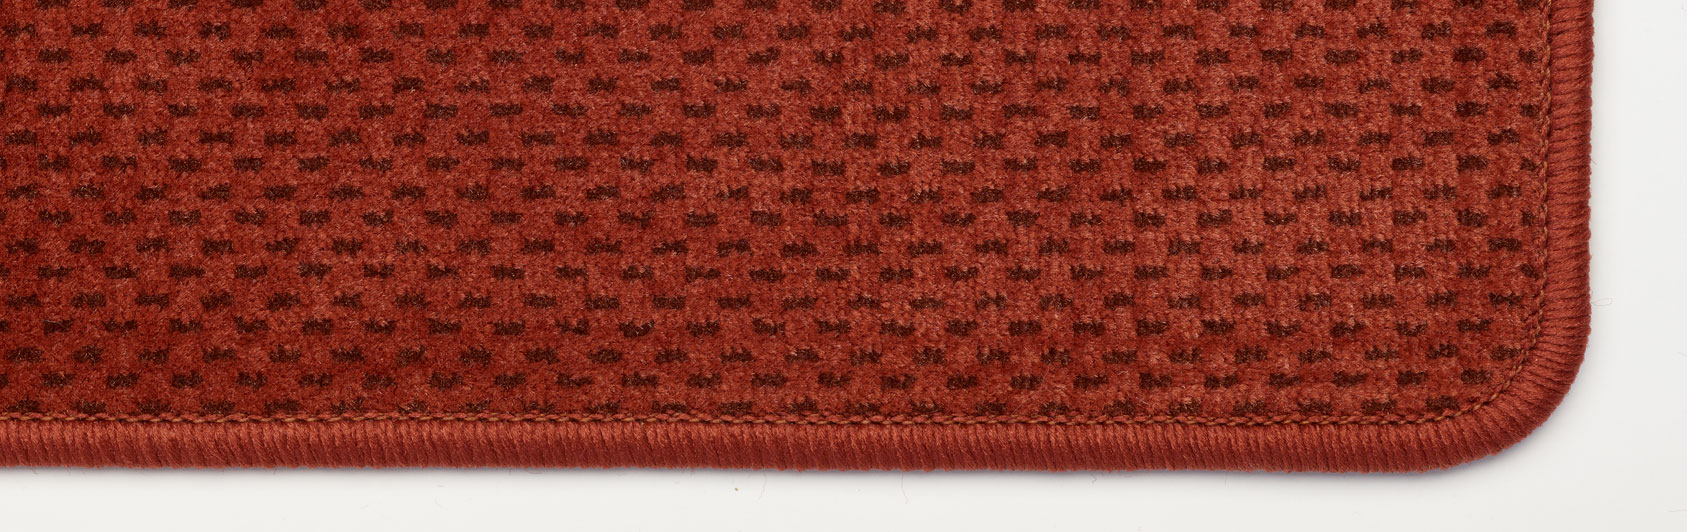 Kirchenteppich Velours Farbcode 2401 Farbe rot